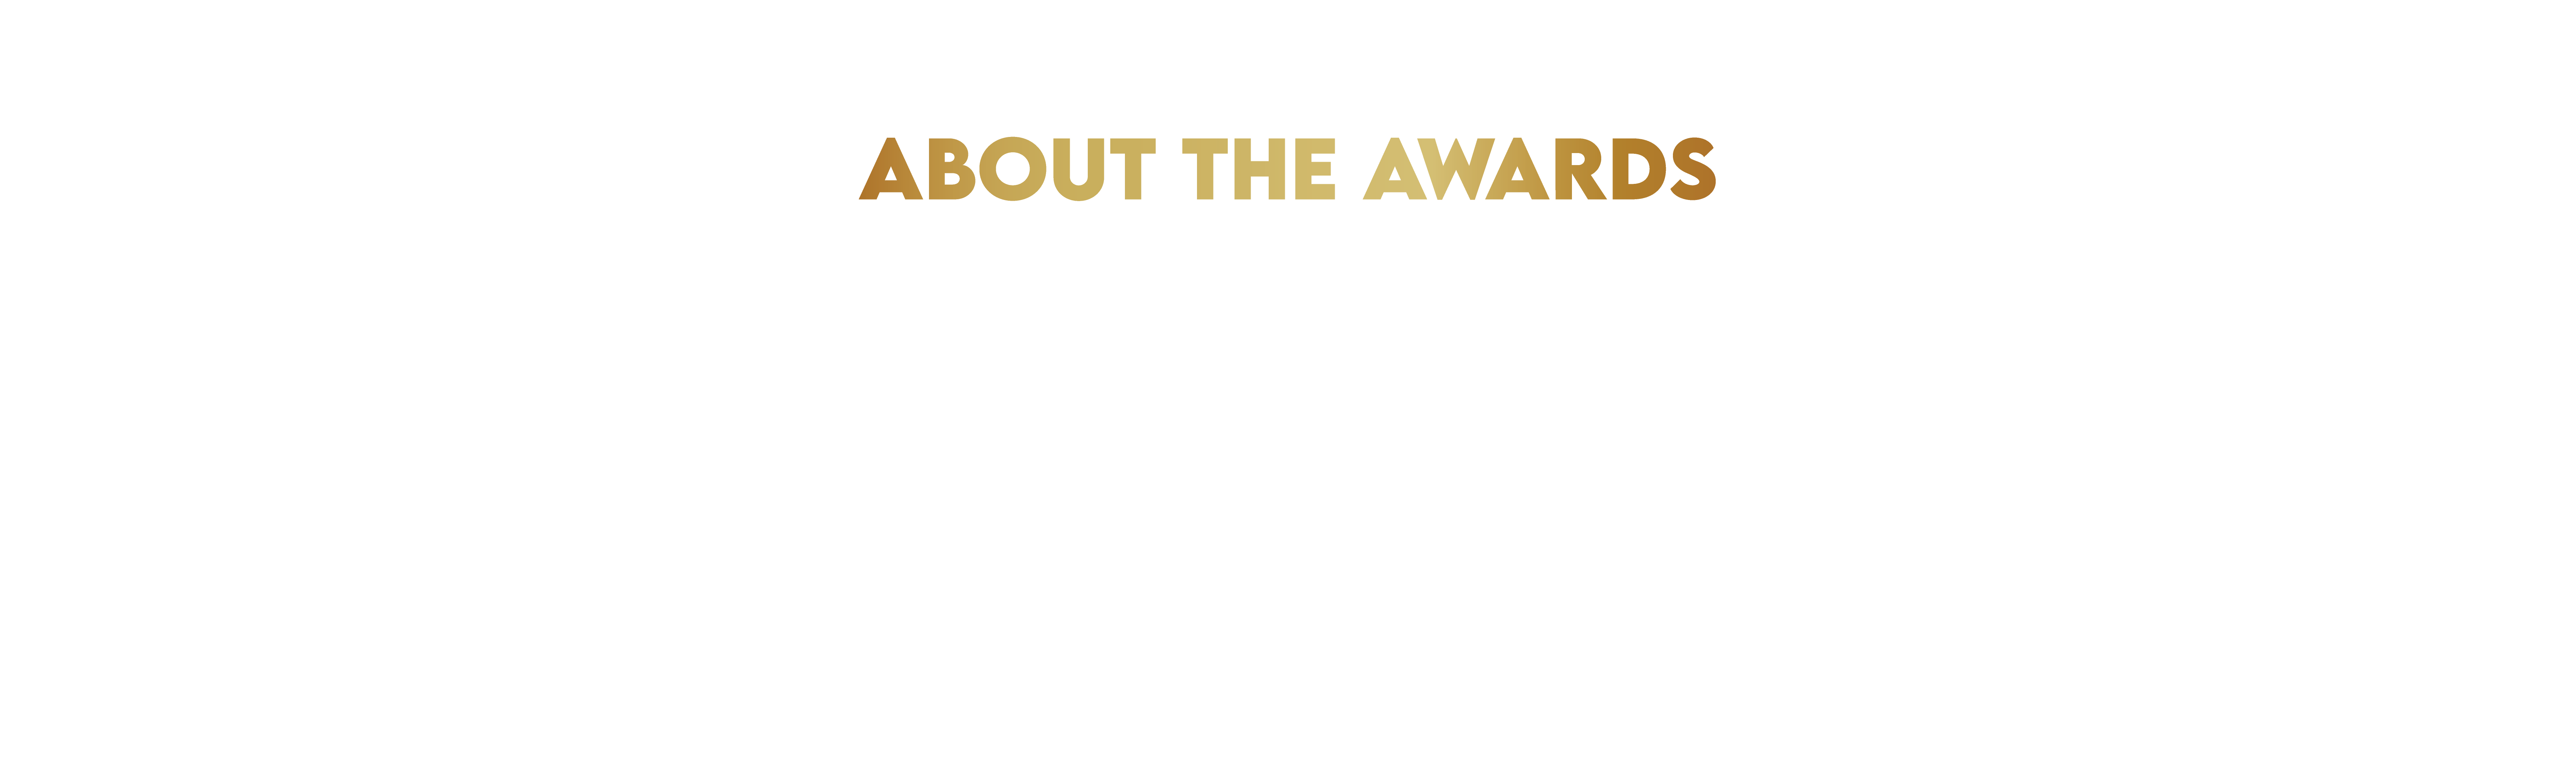 about the awards